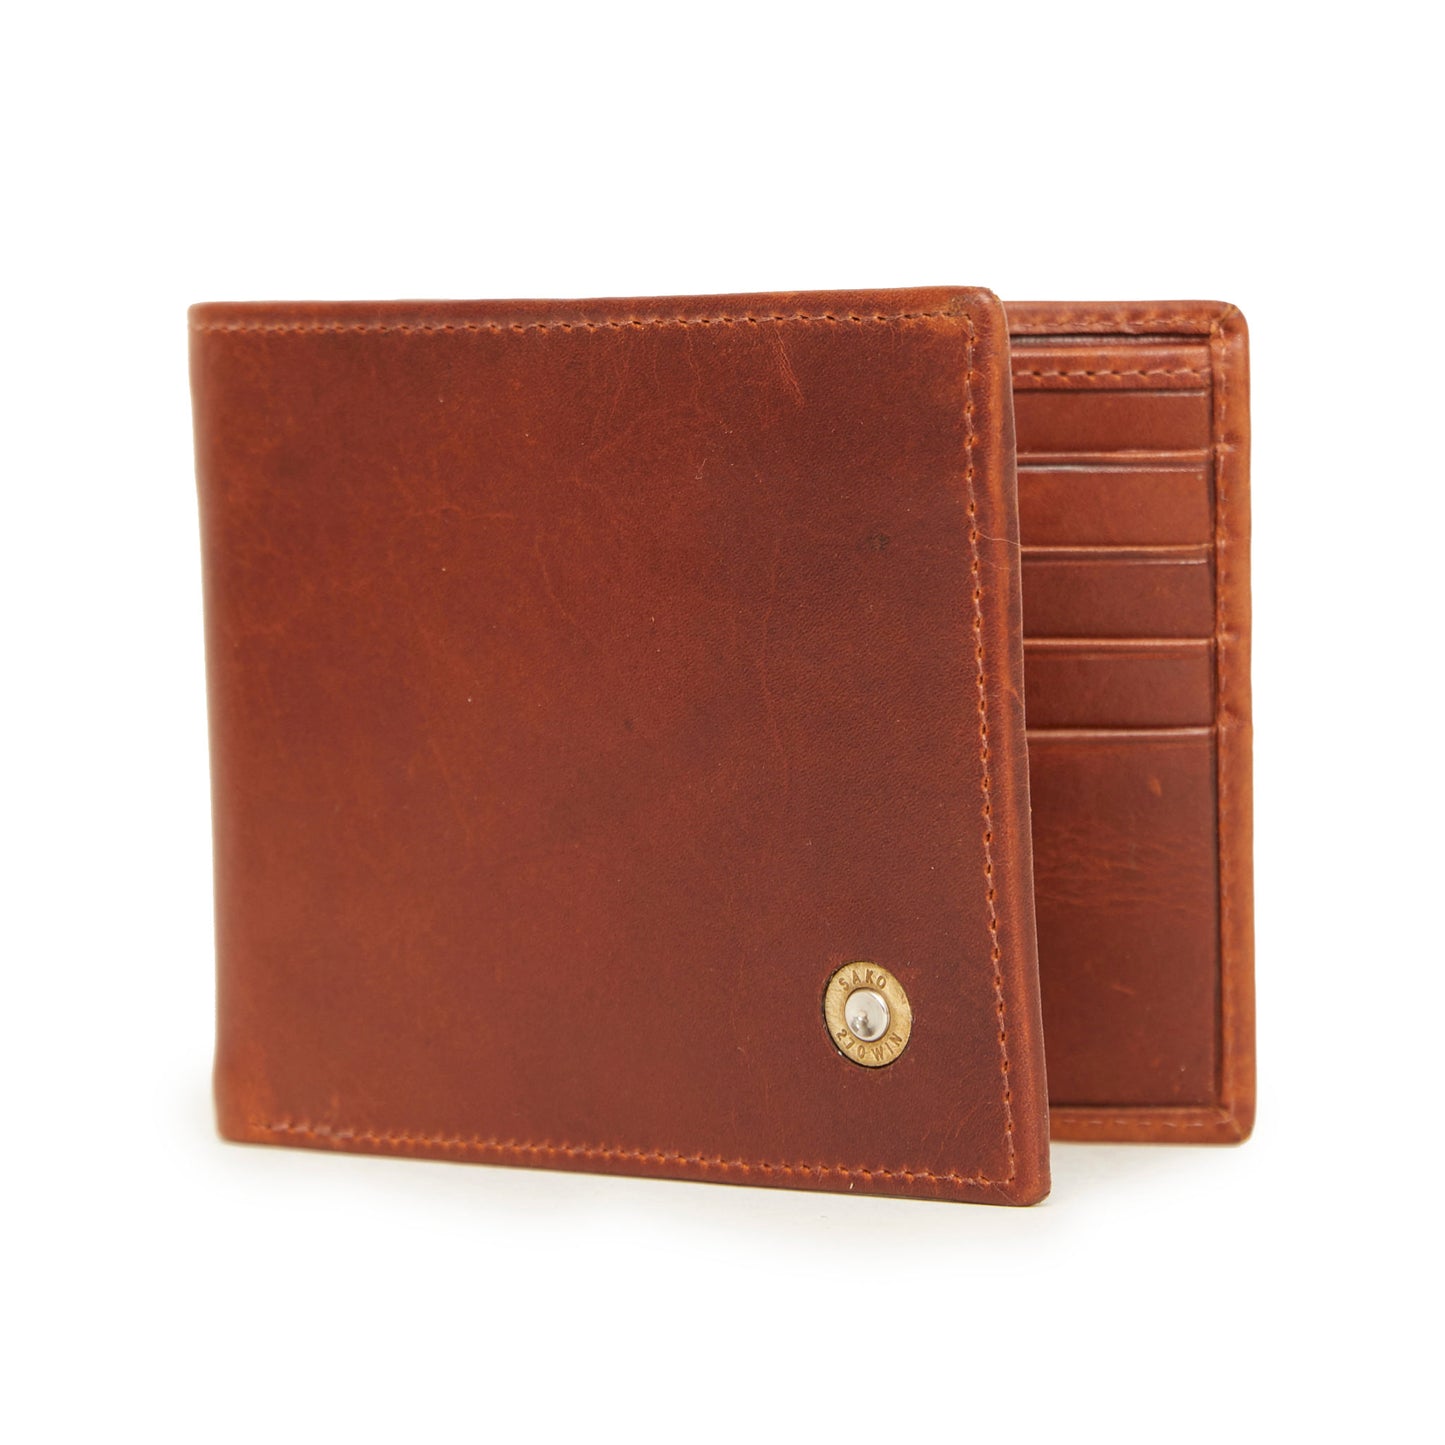 Hicks & Hides Rifle Leather Wallet